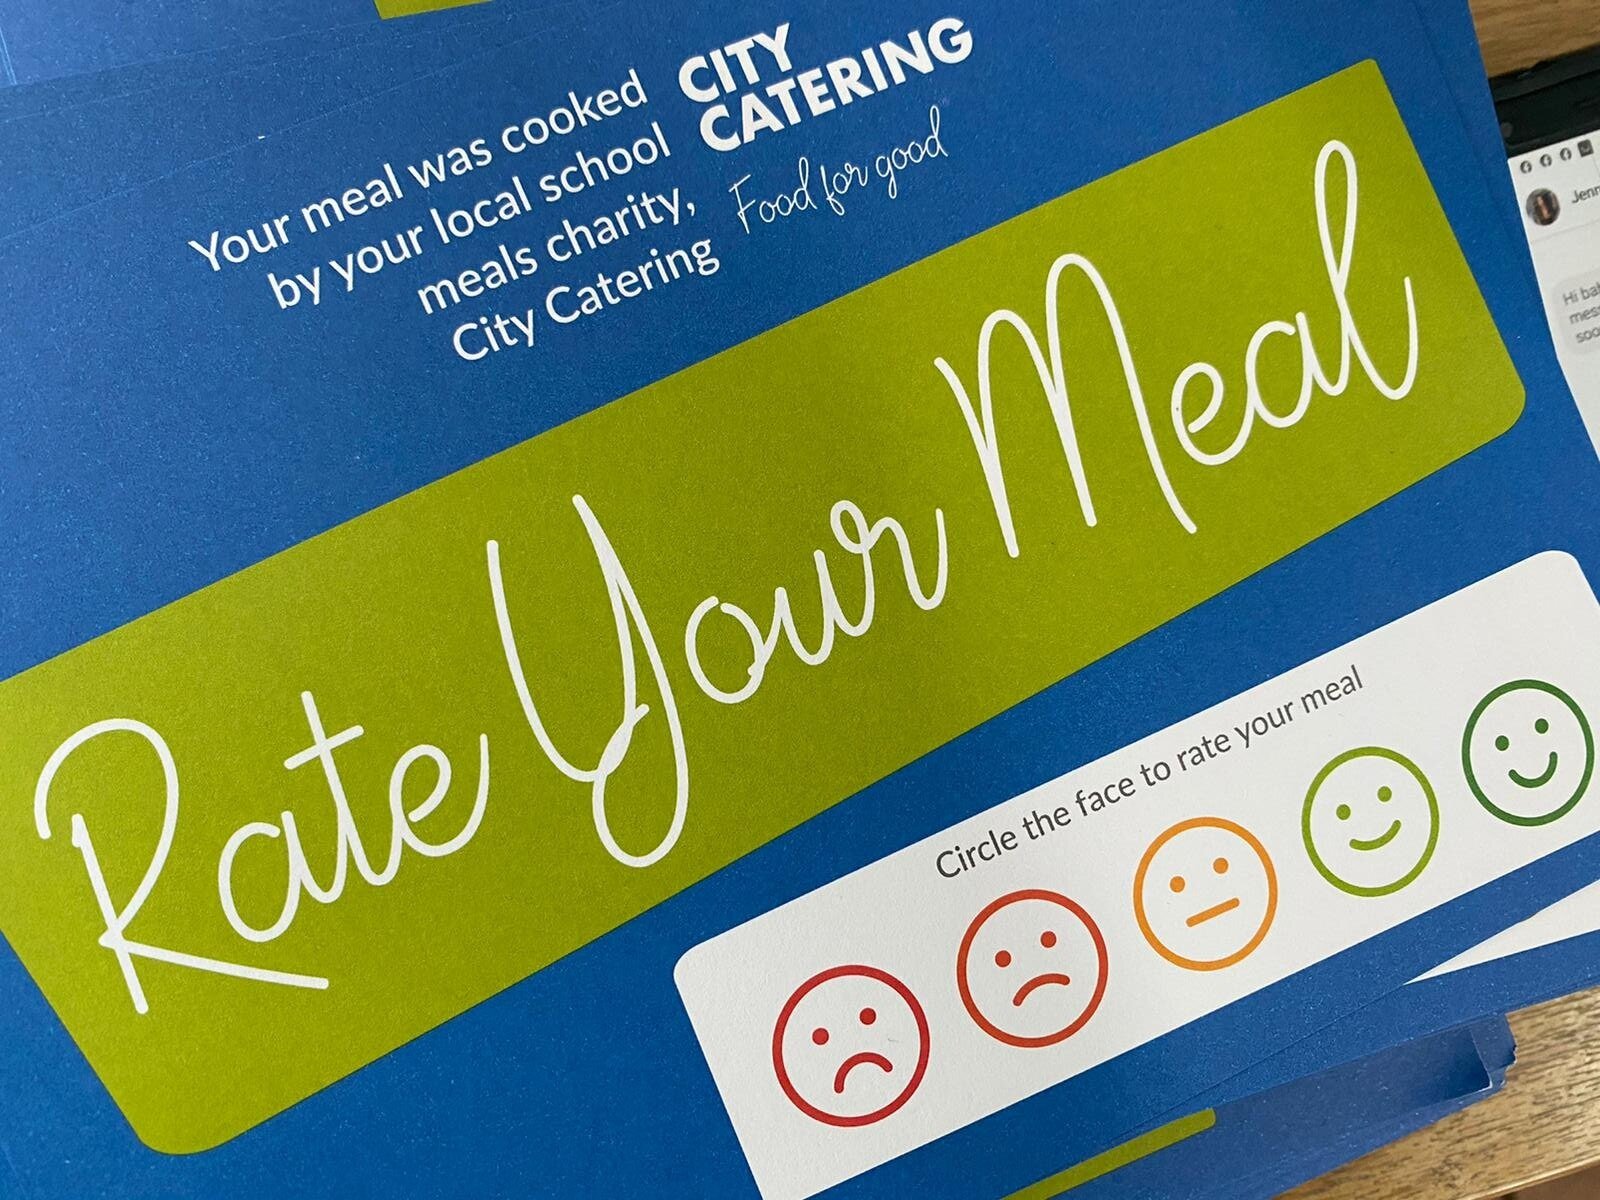 Children will get the chance to give us their feedback on the summer's menu